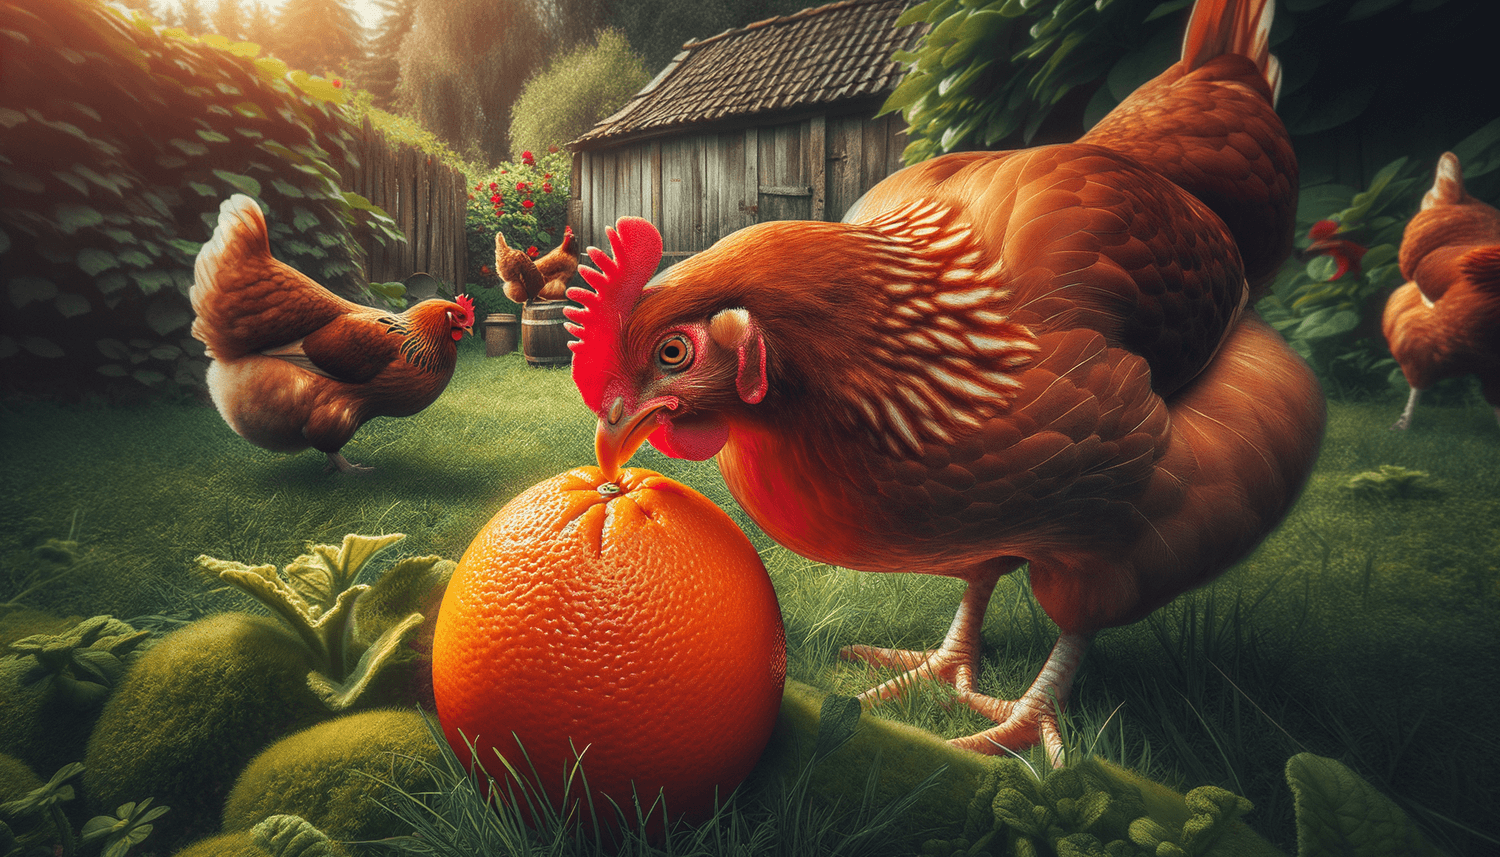 Can Chickens Eat Blood Oranges?